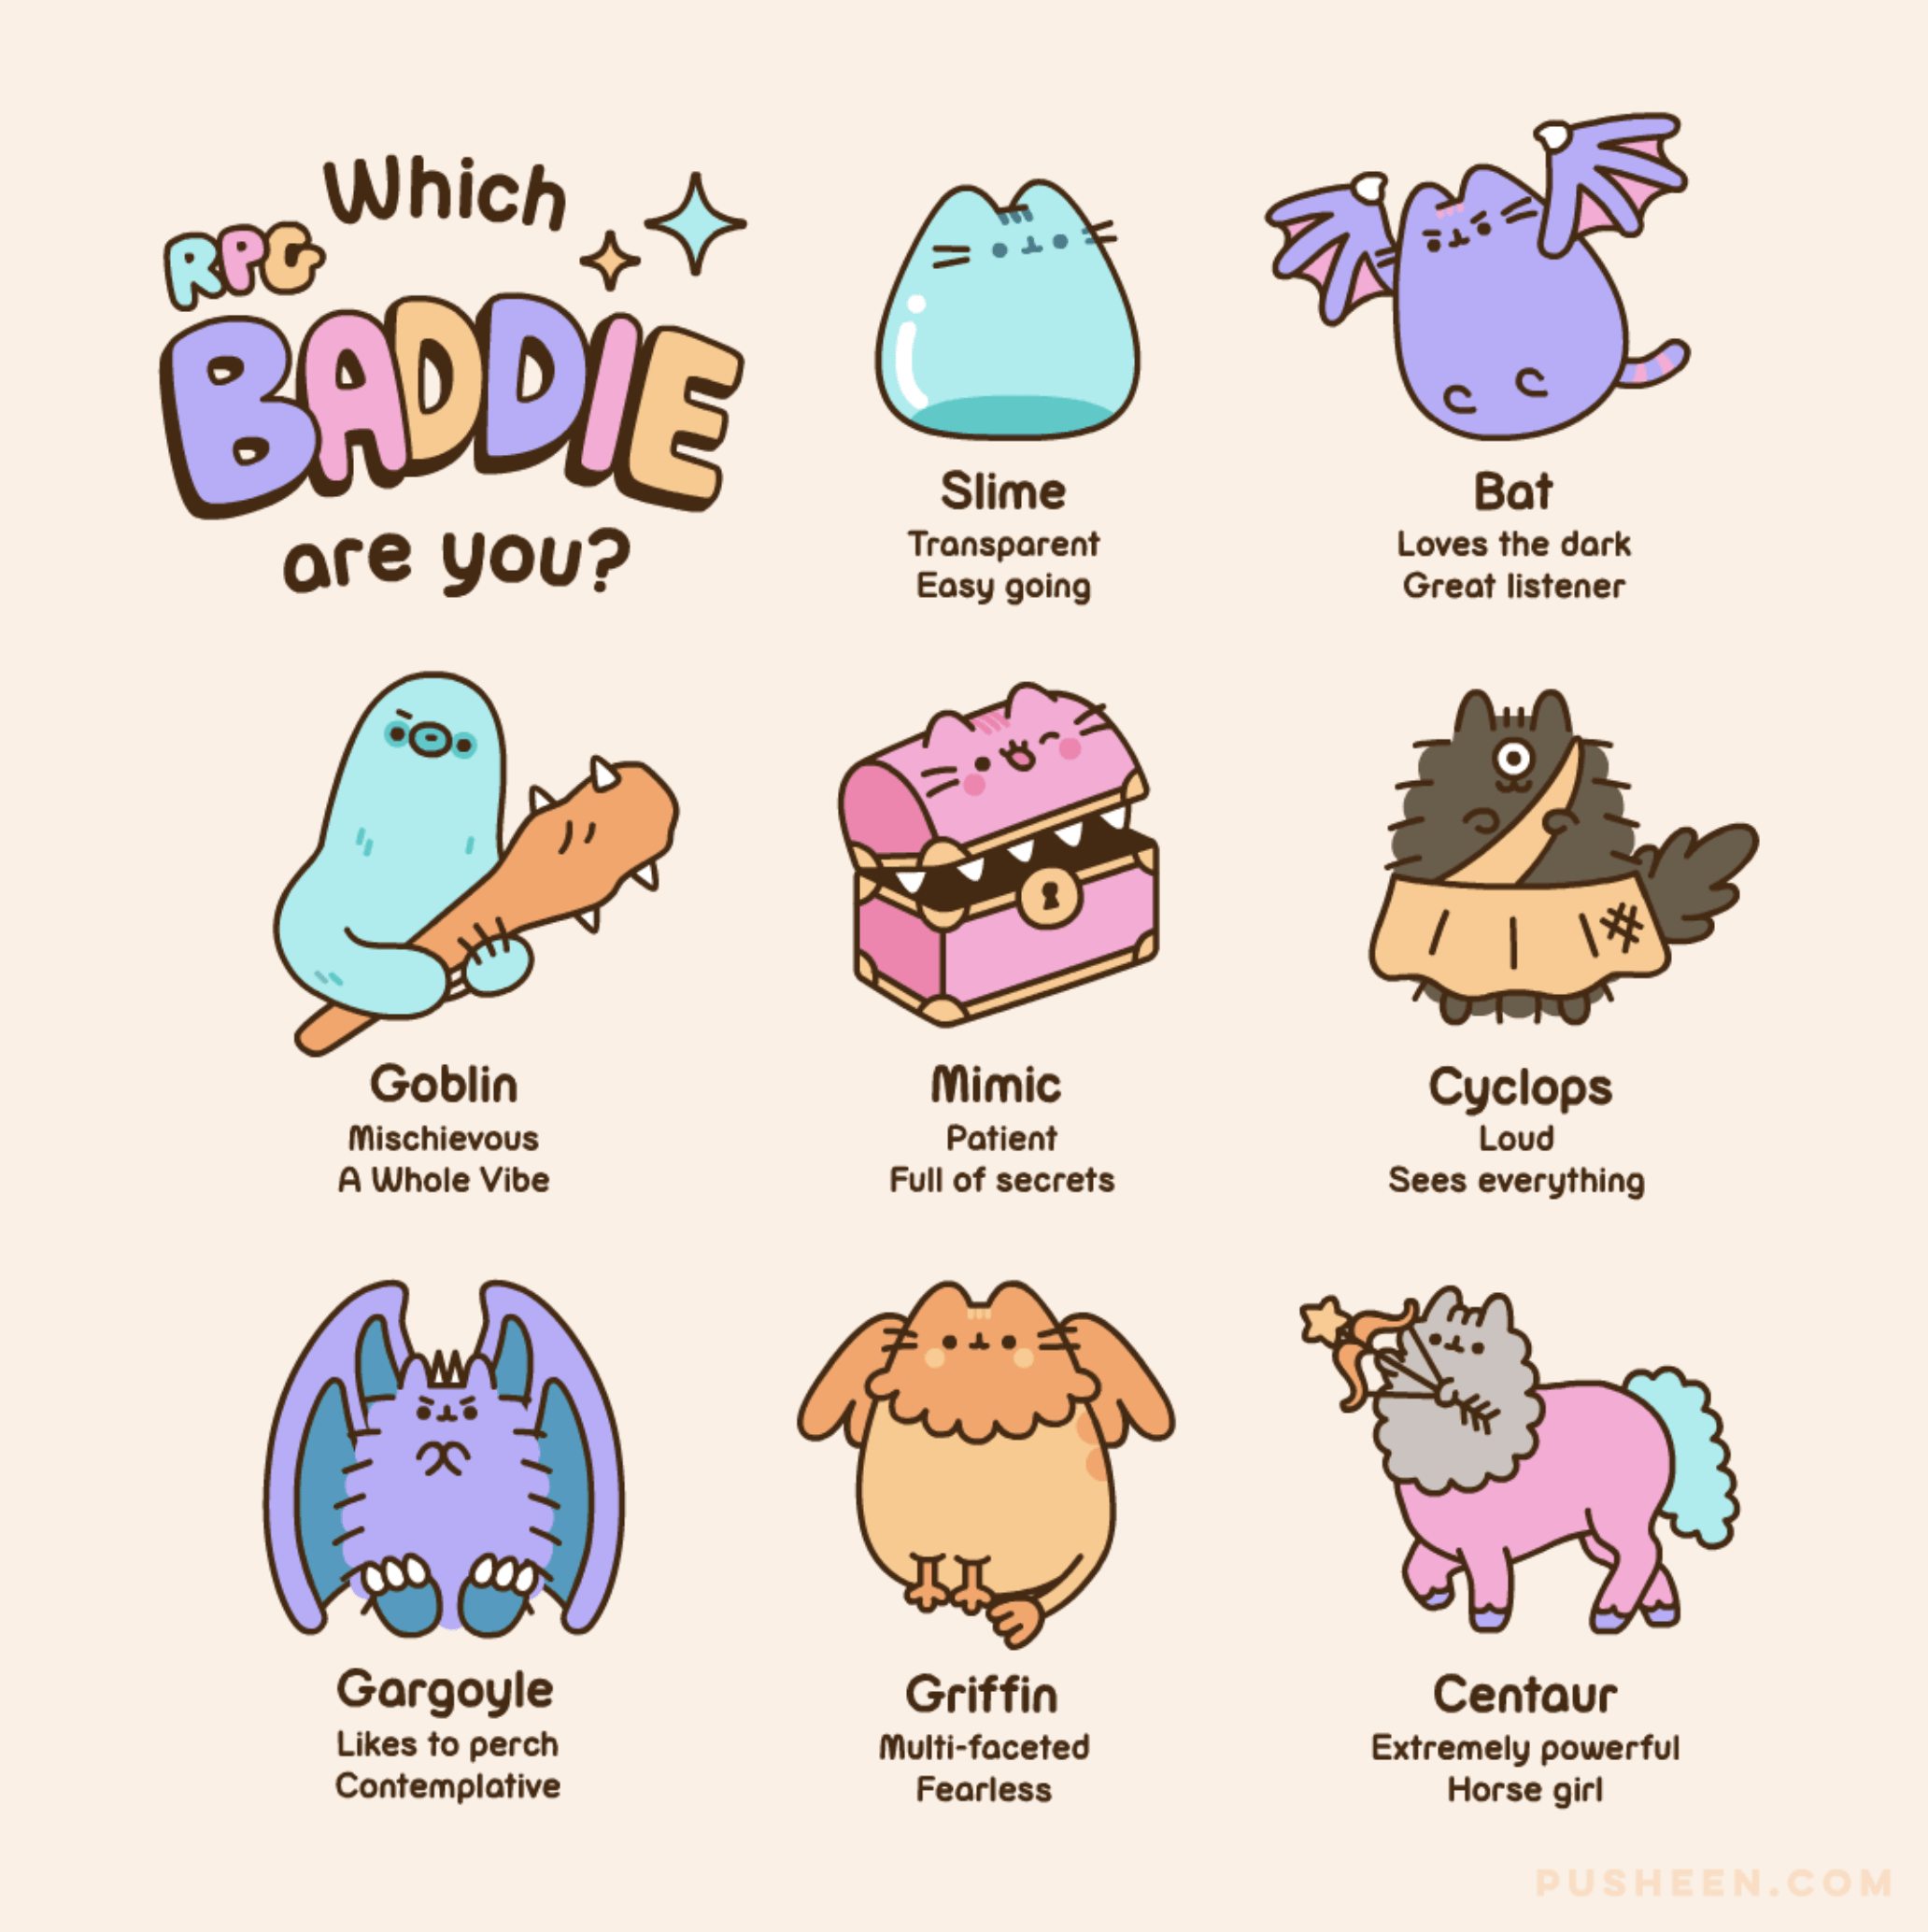 Which Pusheen baddie are you? Choose your favorite from the list. - Pusheen, Halloween